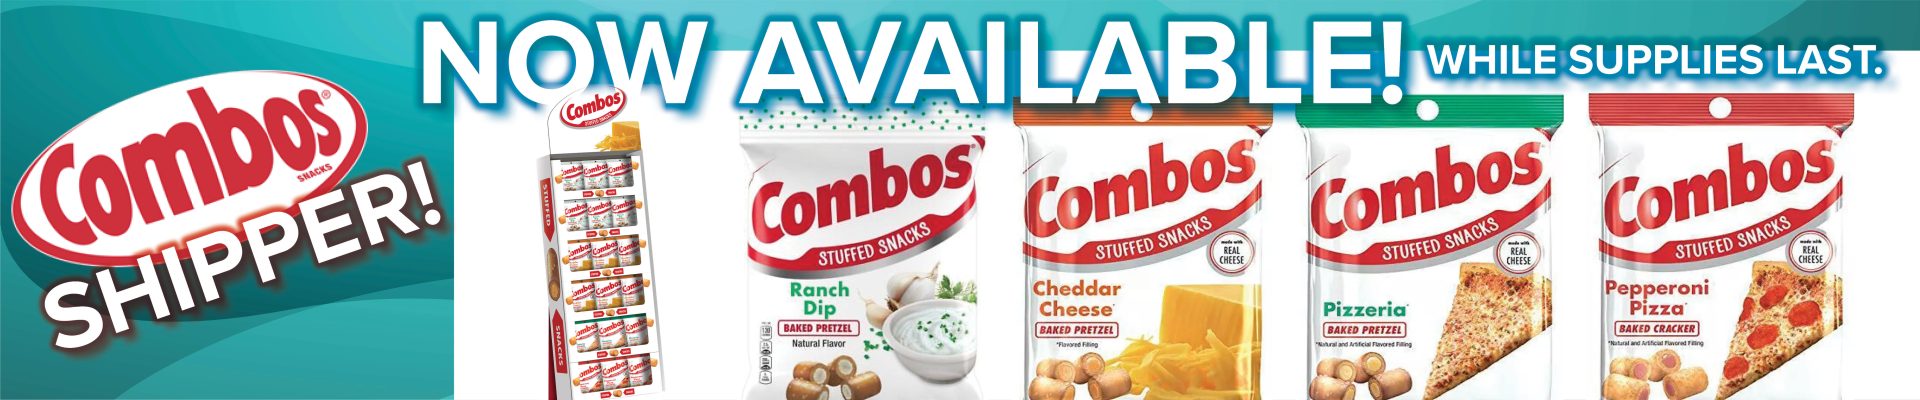 Combos Now Available Bar